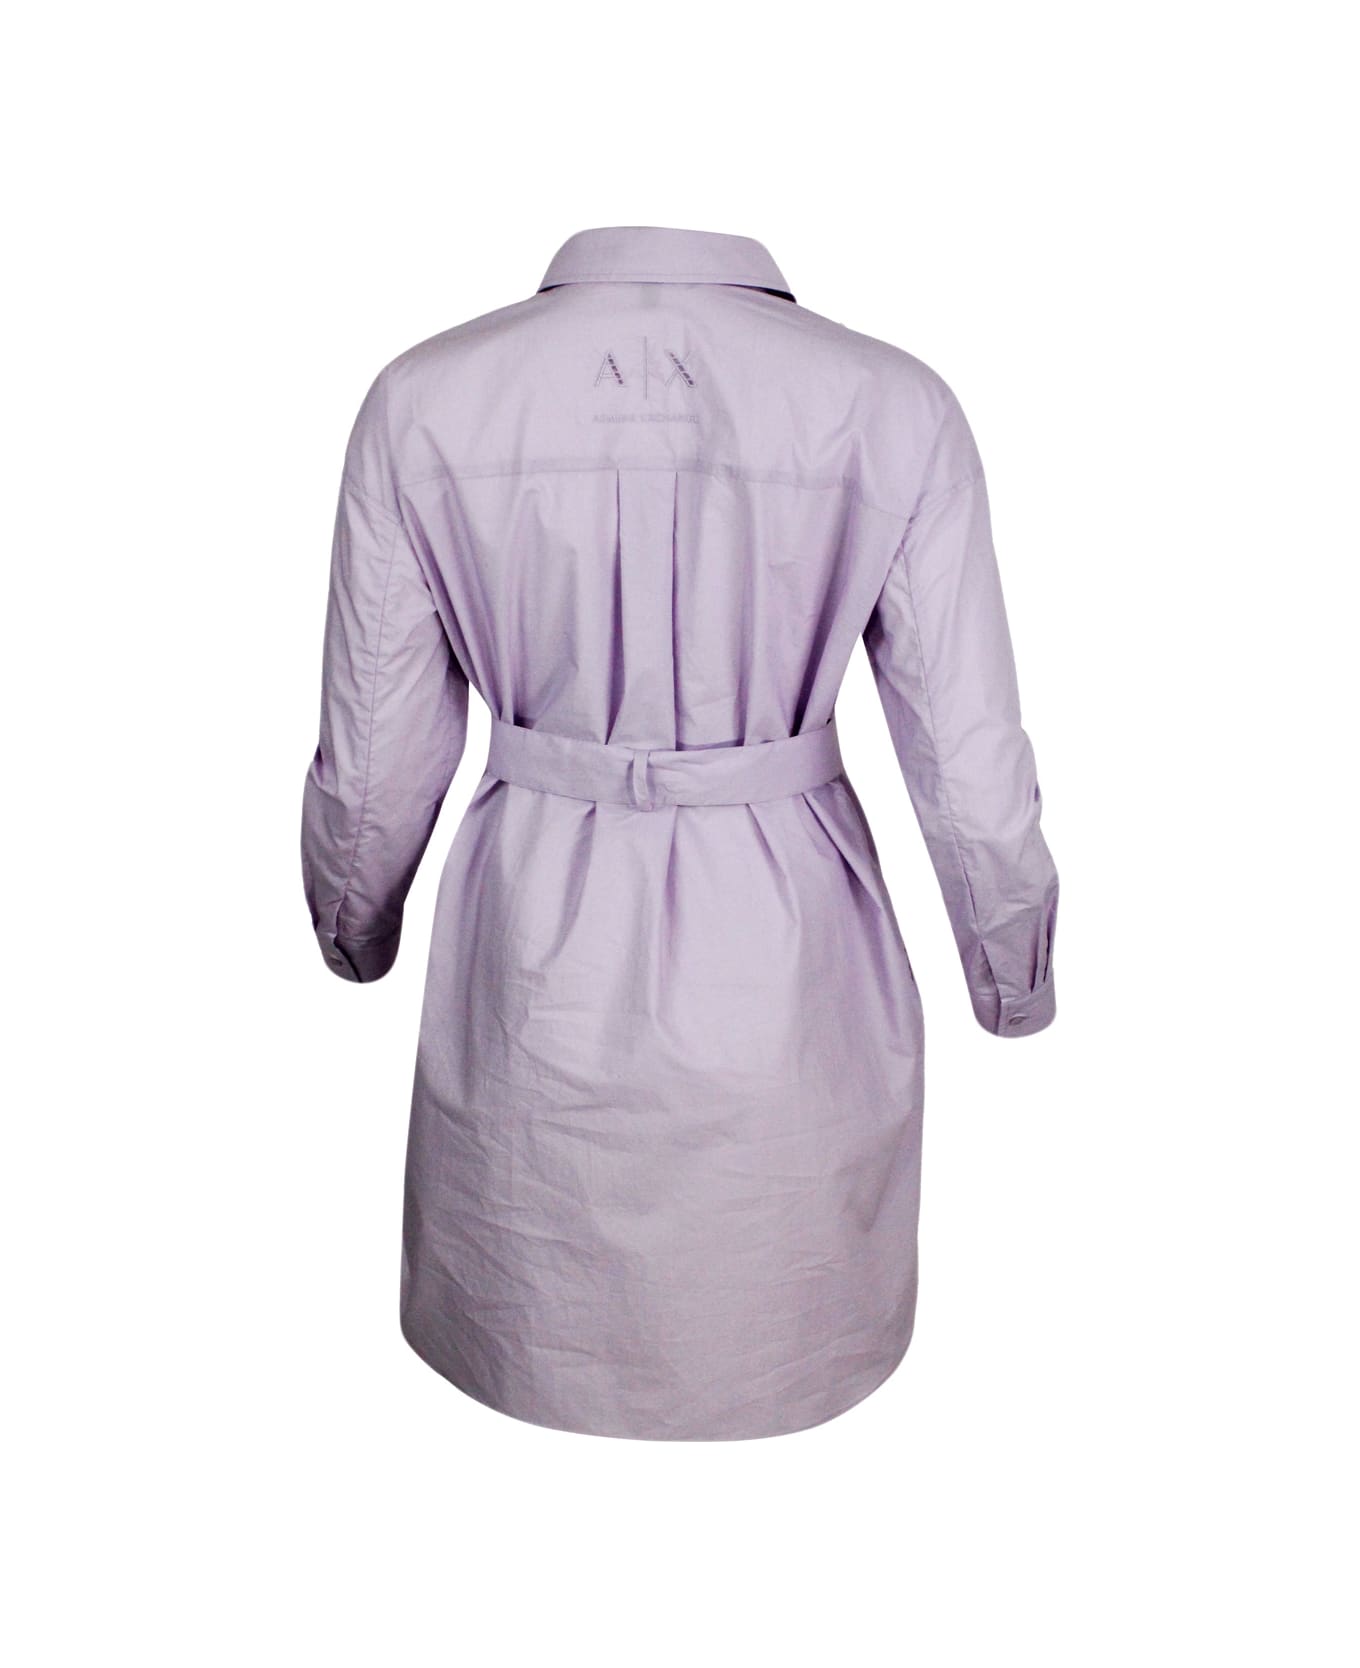 Armani Collezioni Dress Made Of Soft Cotton With Long Sleeves, With Button Closure On The Front And Belt. - Pink ワンピース＆ドレス